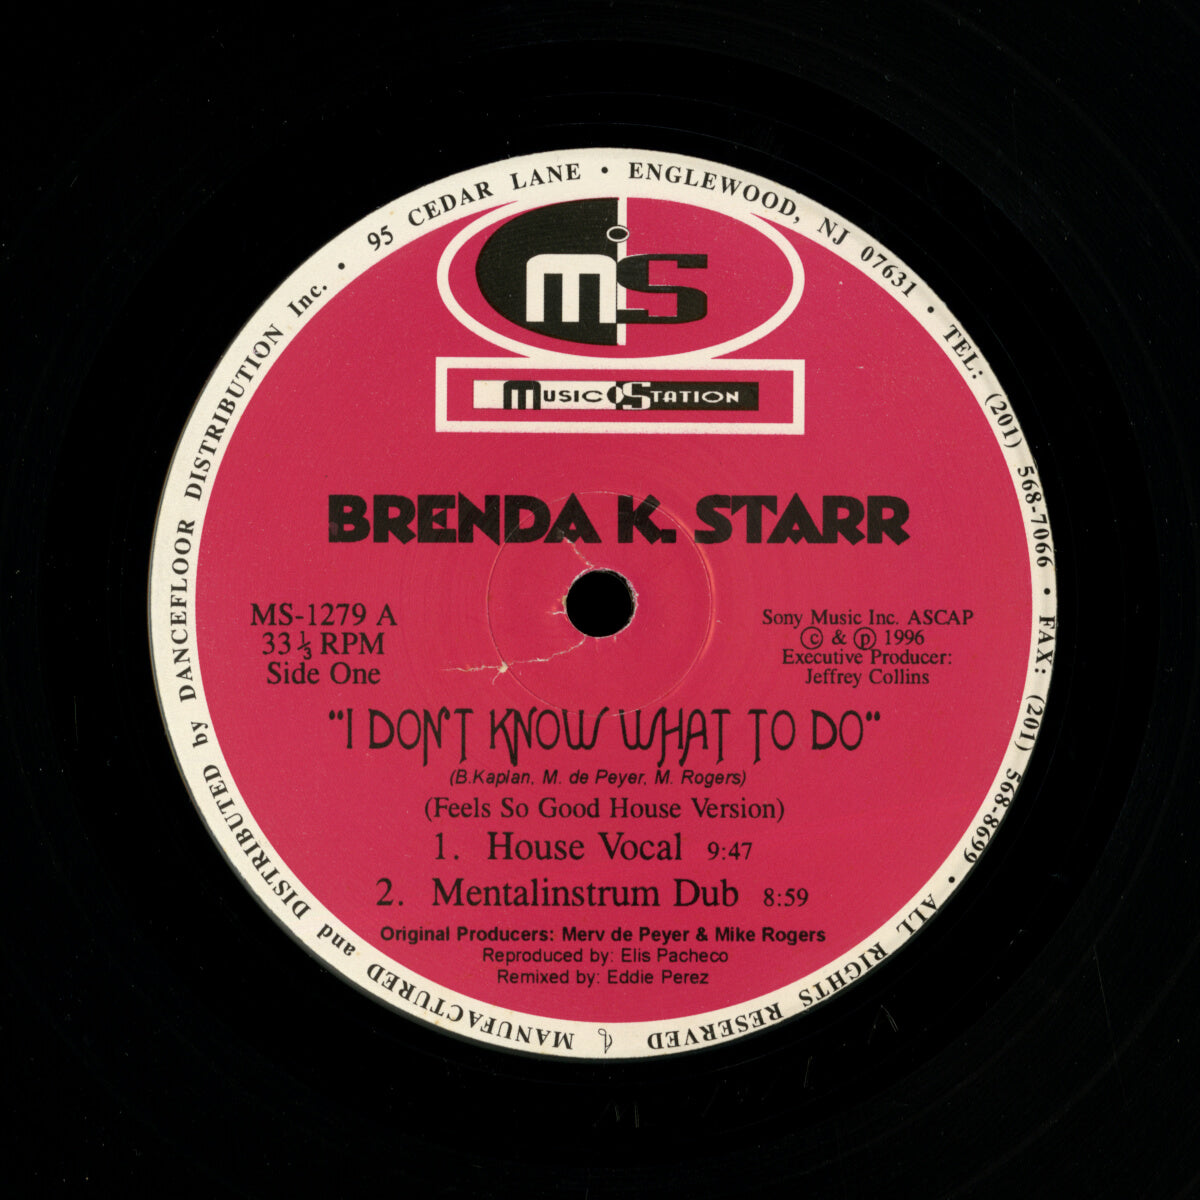 Brenda K. Starr – I Don't Know What To Do